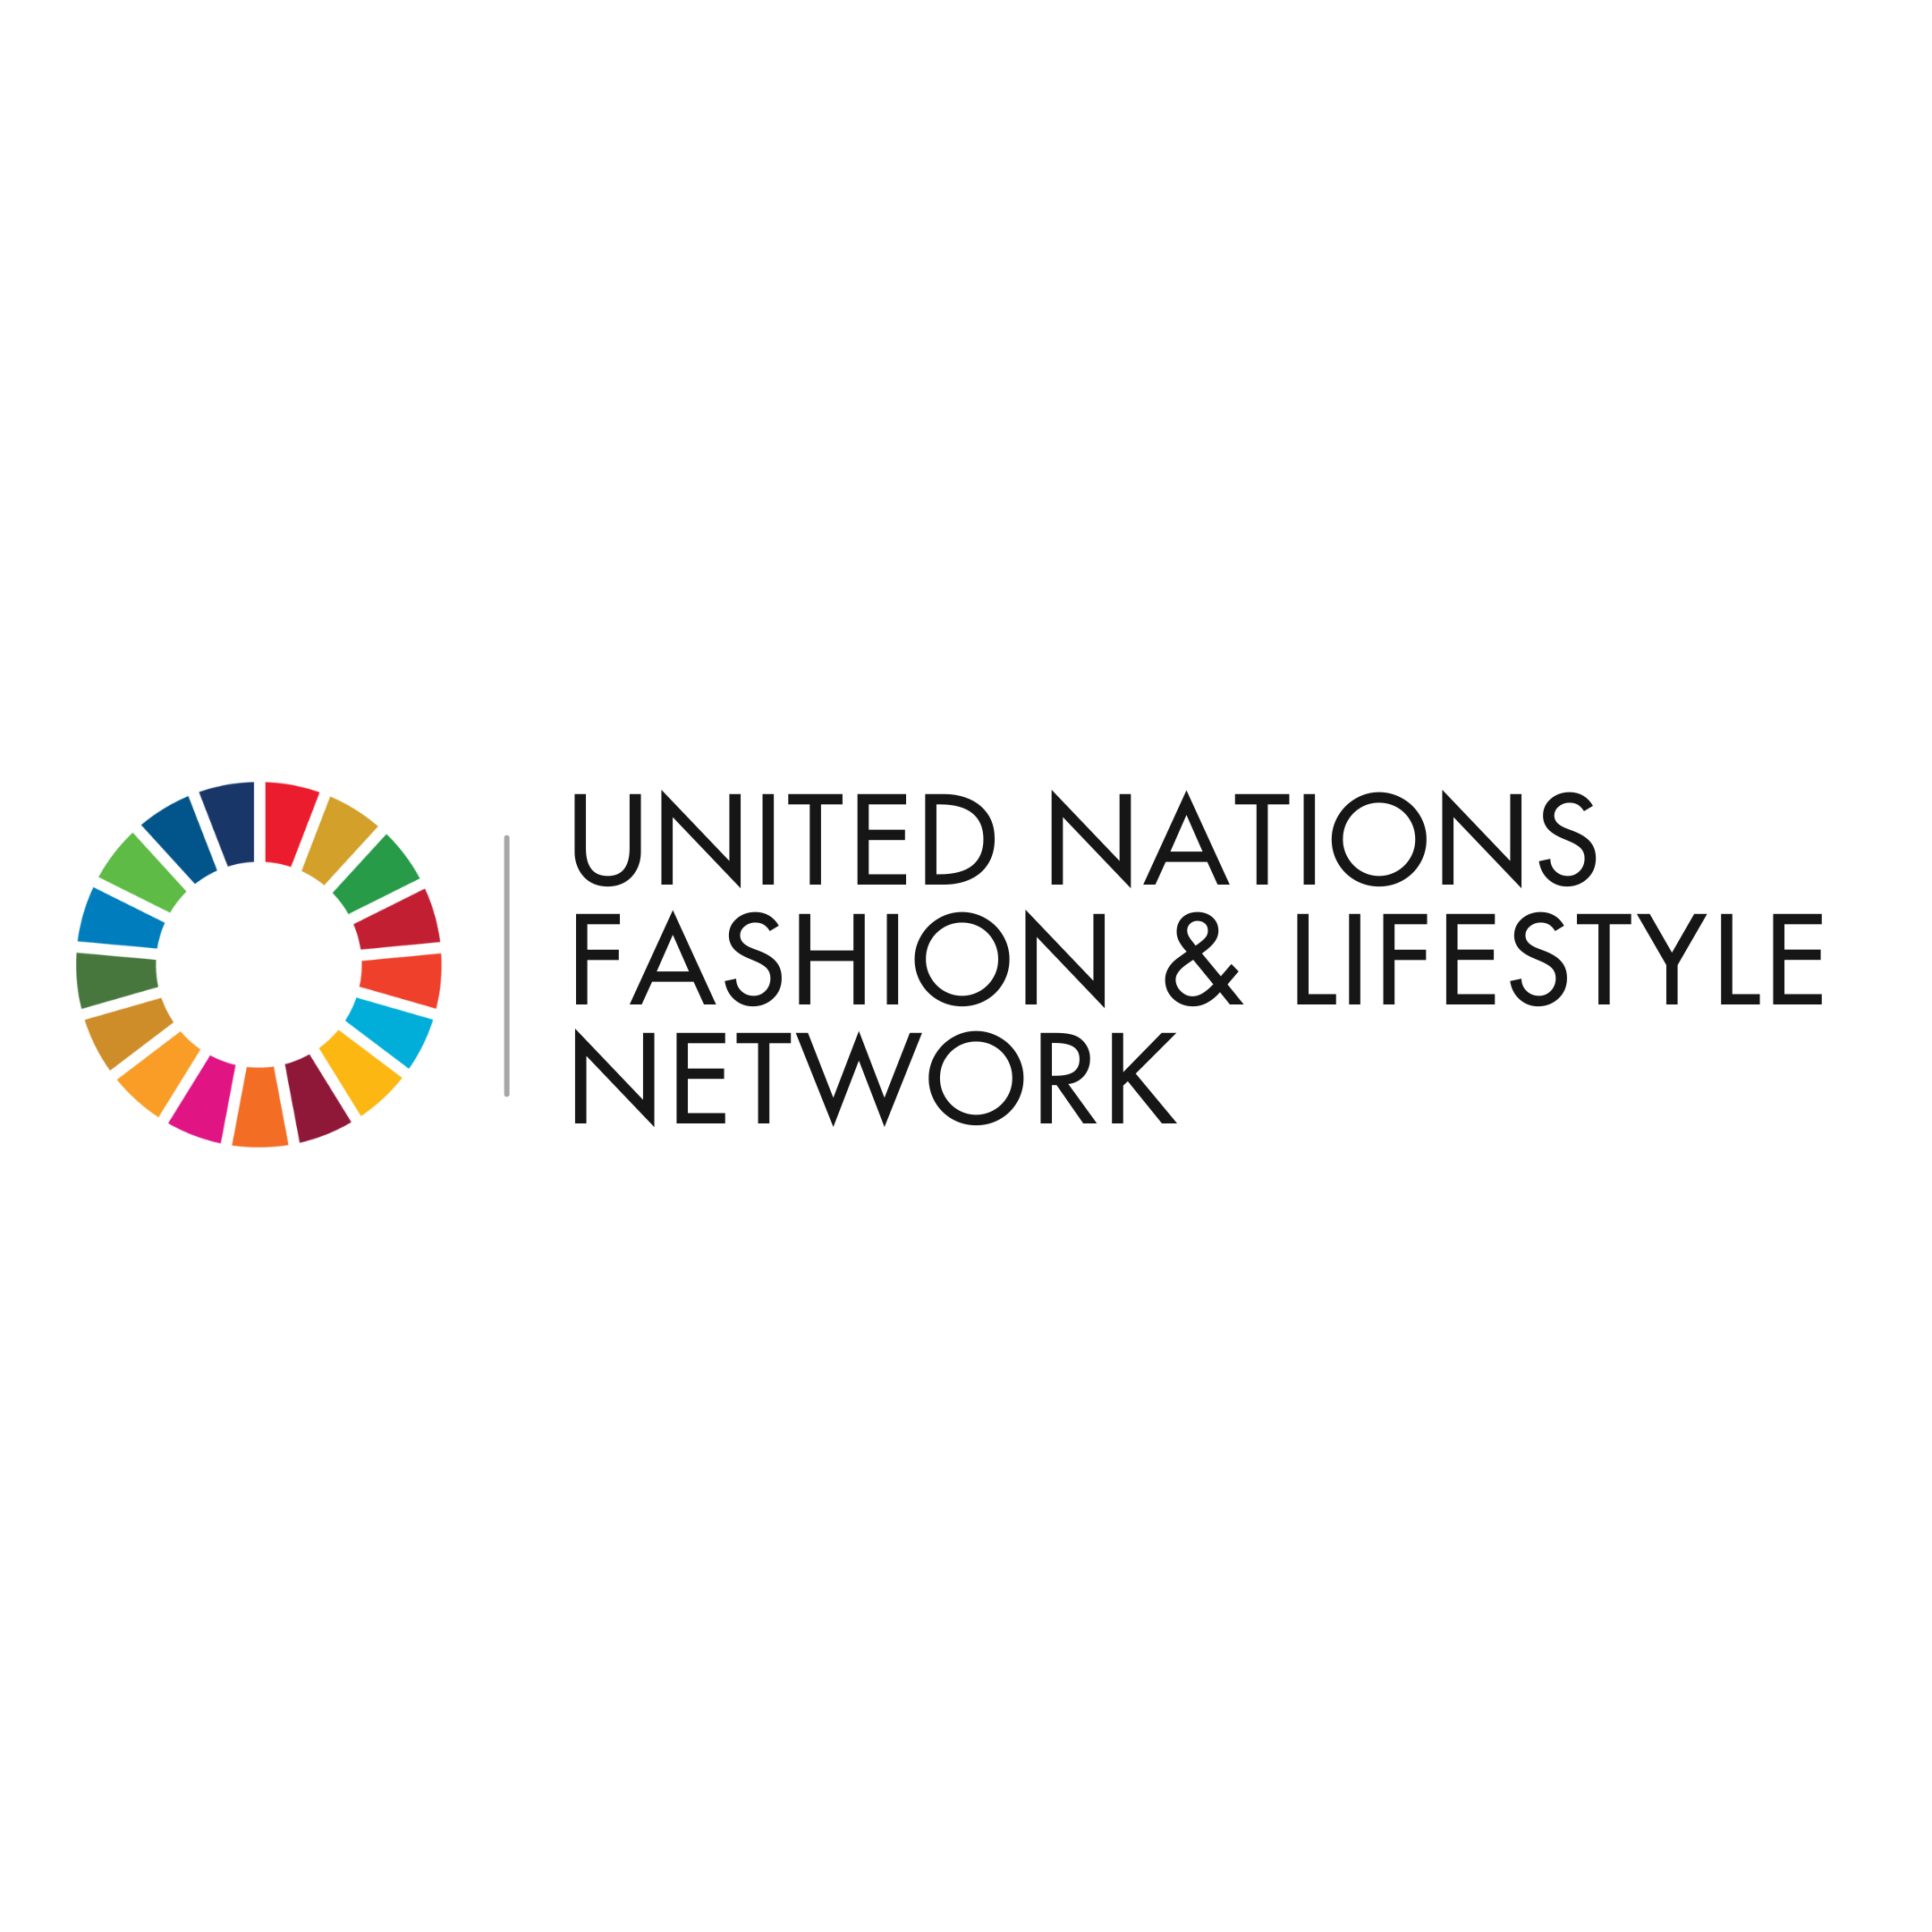 Conscious Fashion and Lifestyle Network